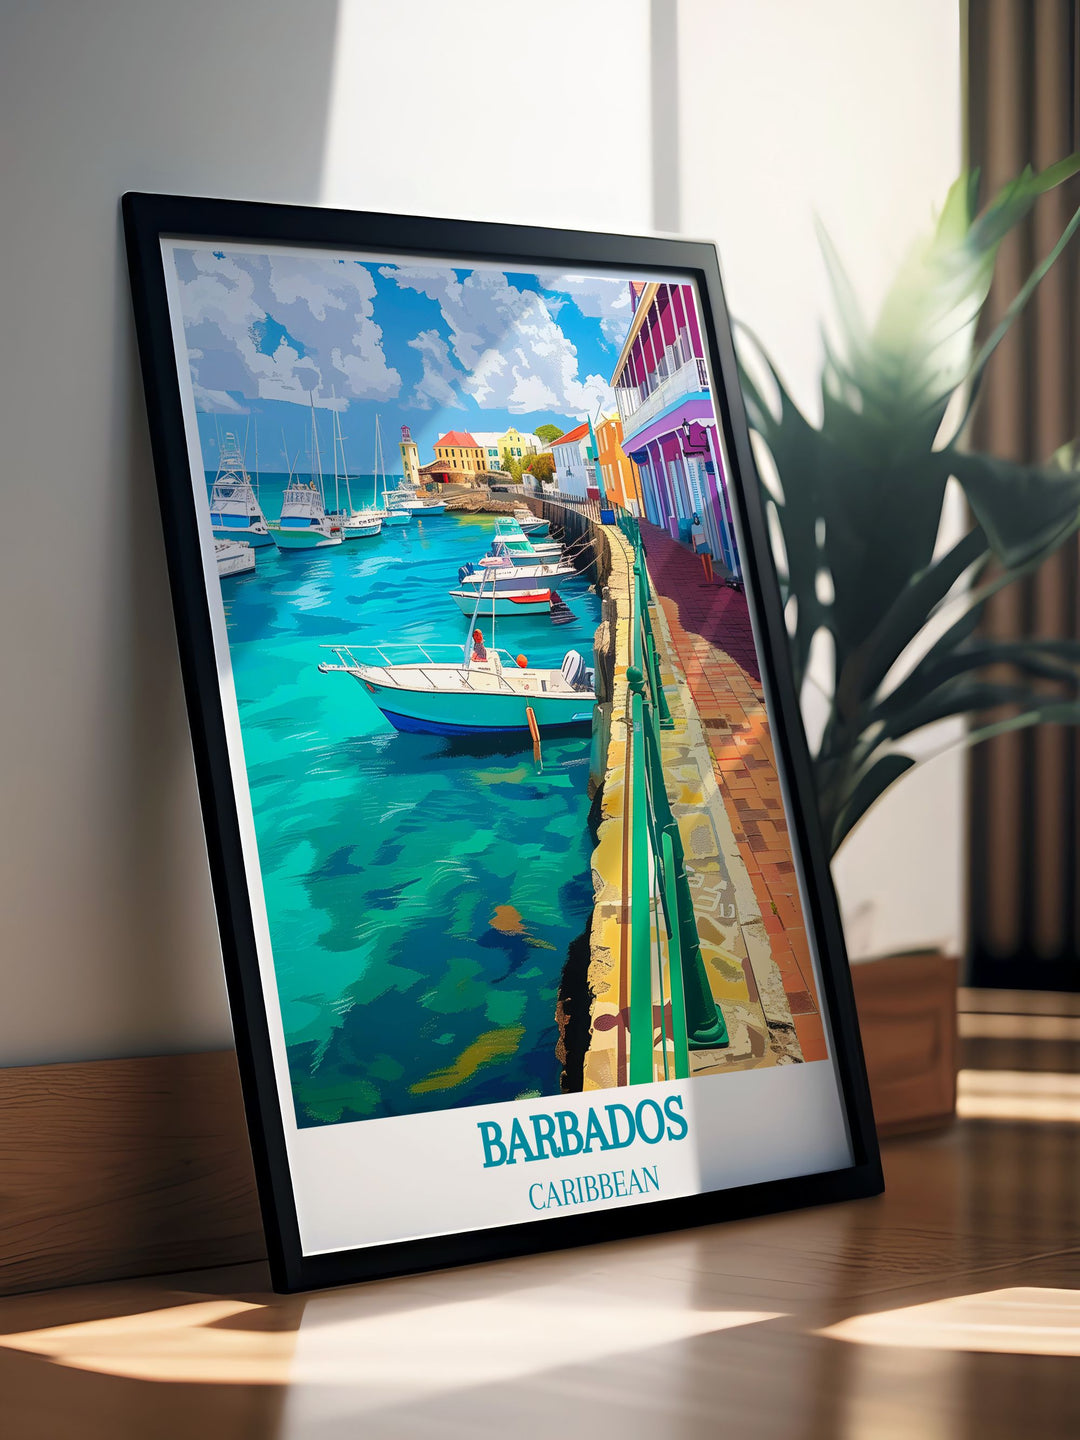 Barbados Travel Poster capturing the heart of the Caribbean with vivid imagery of Bridgetown, inviting you to explore the vibrant culture and picturesque scenes of this beautiful island, ideal for inspiring wanderlust and adventure.